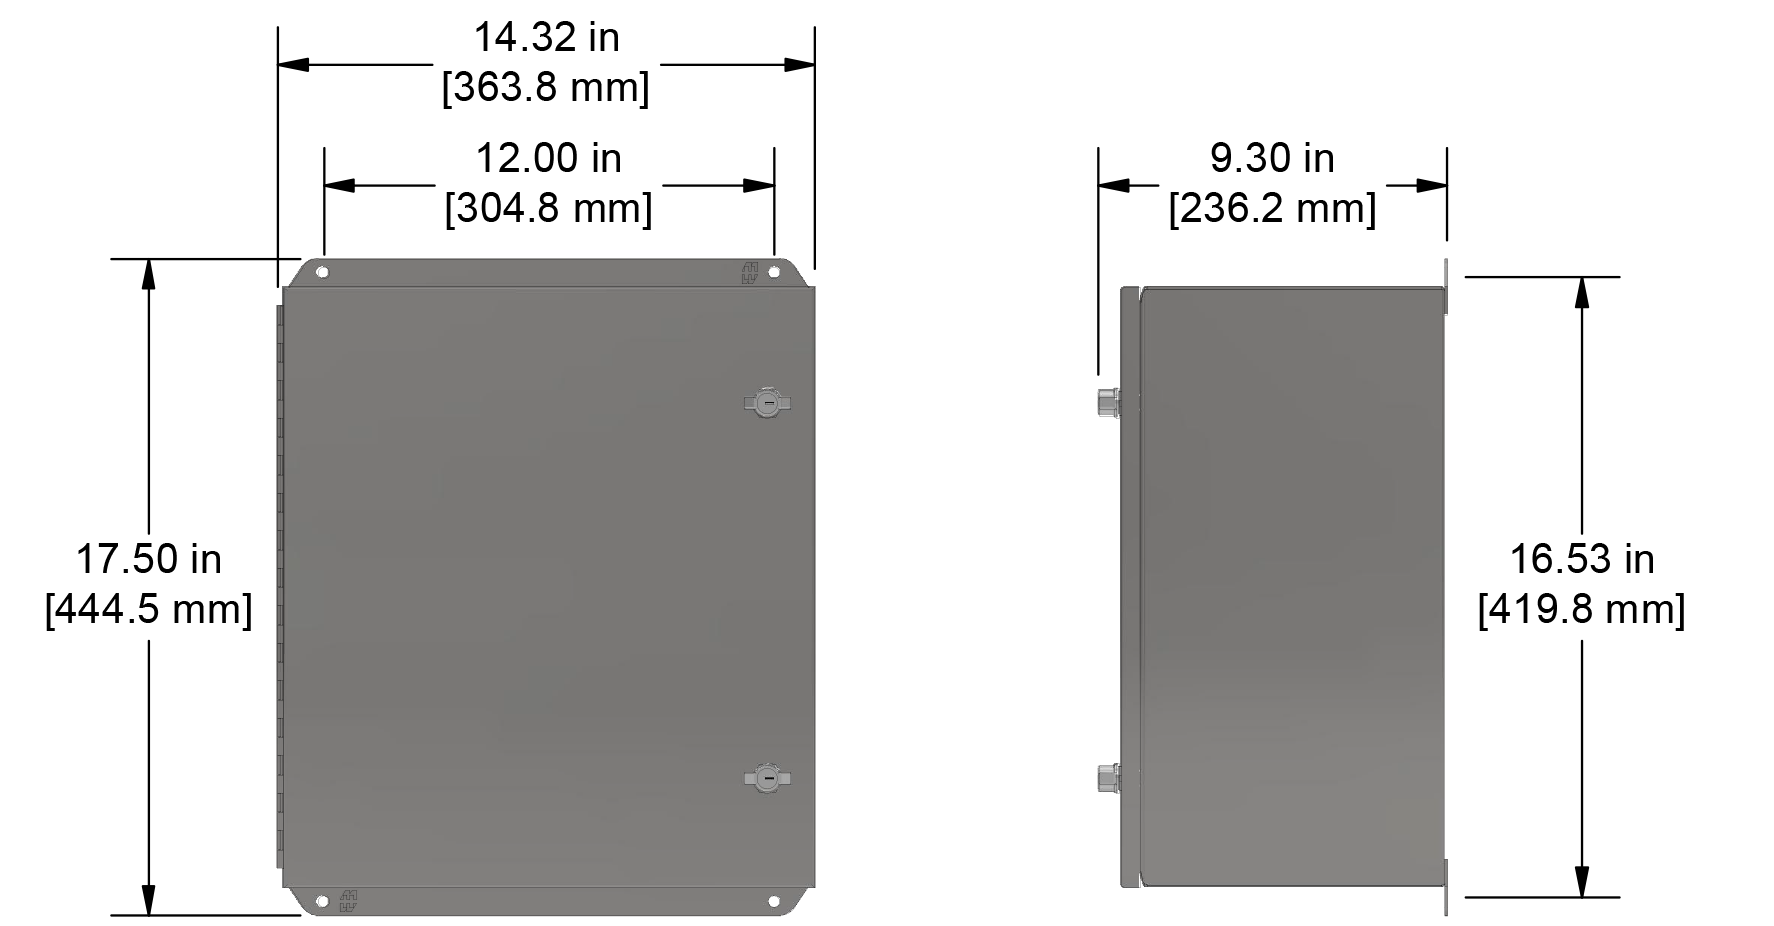 A drawing showing the dimensions of a CTC PXE450P Extended Capacity industrial enclosure.